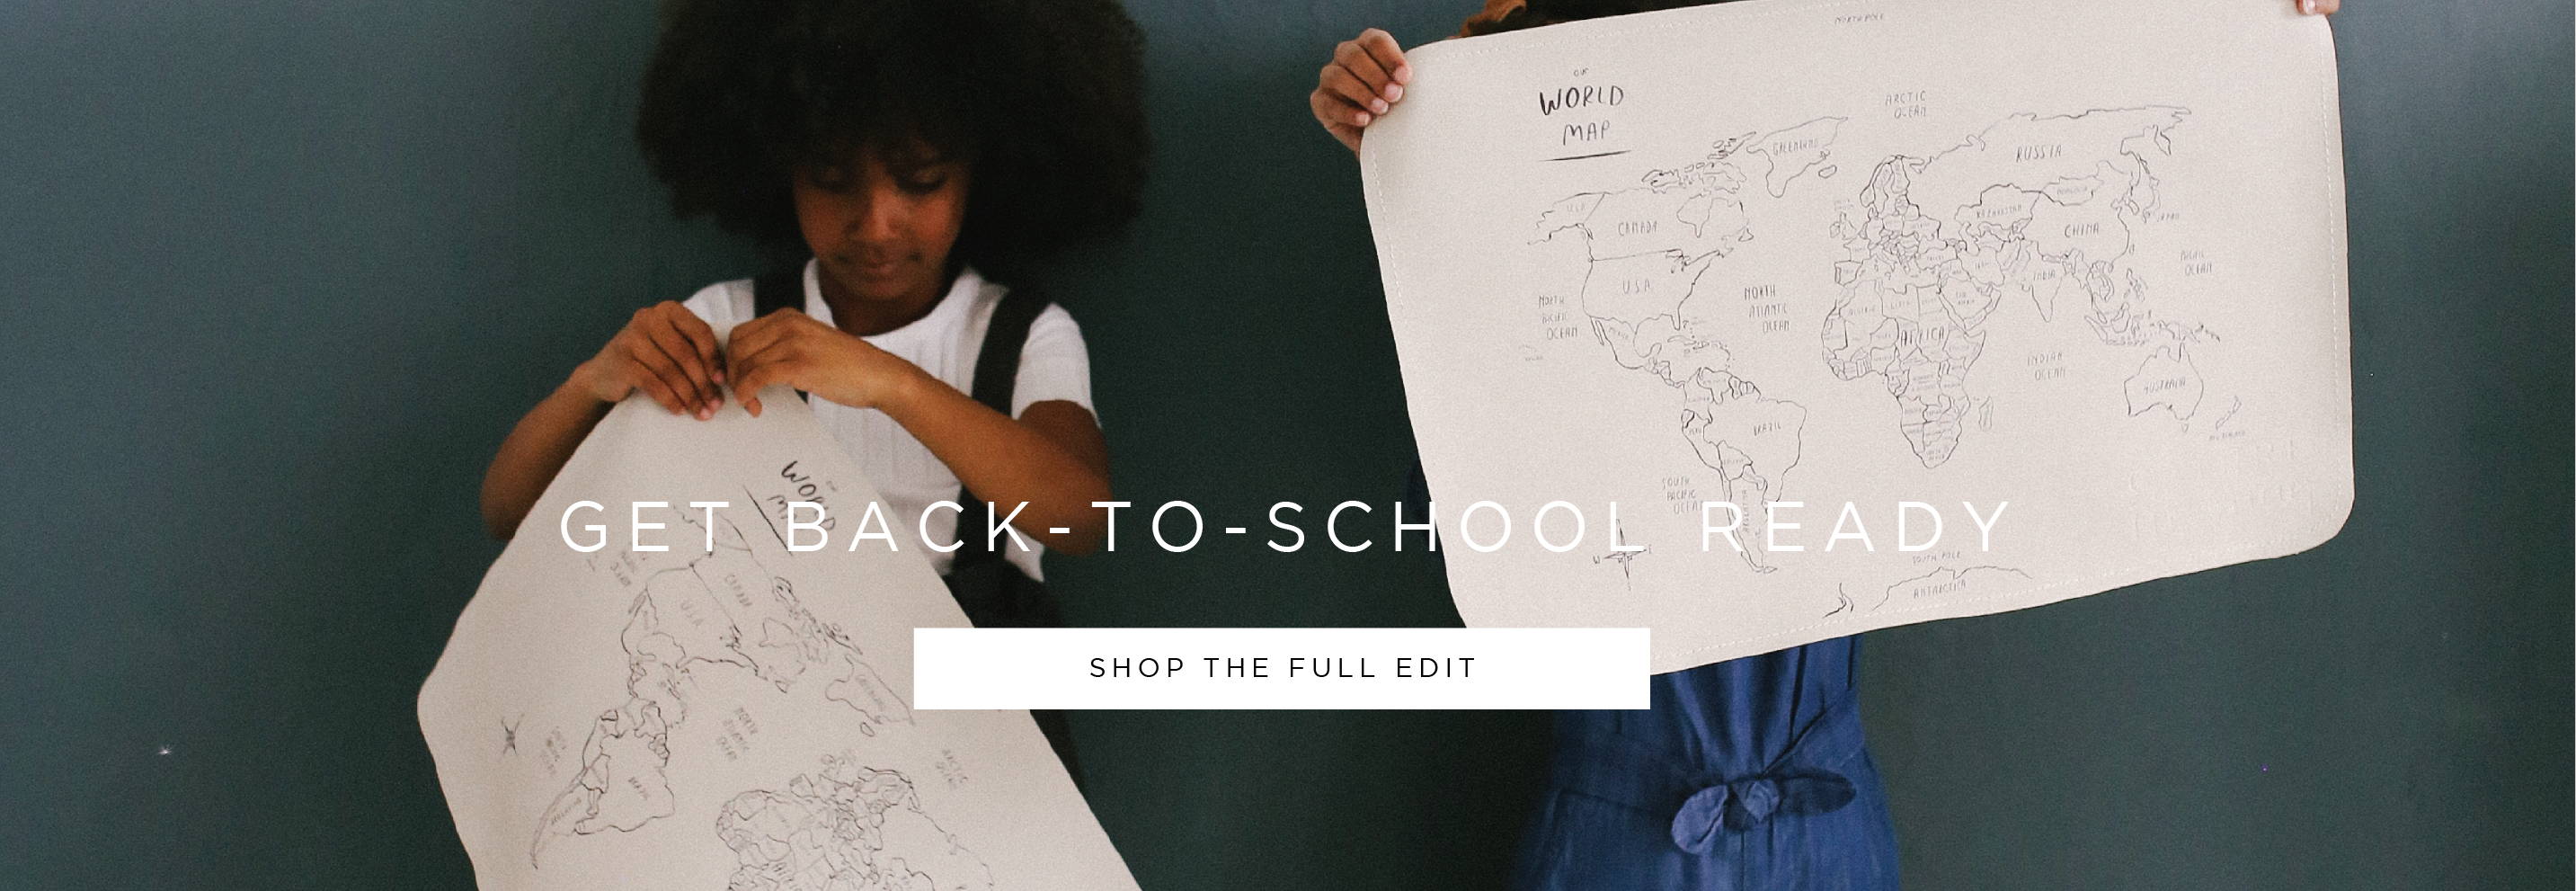 Get Back - To - School Ready